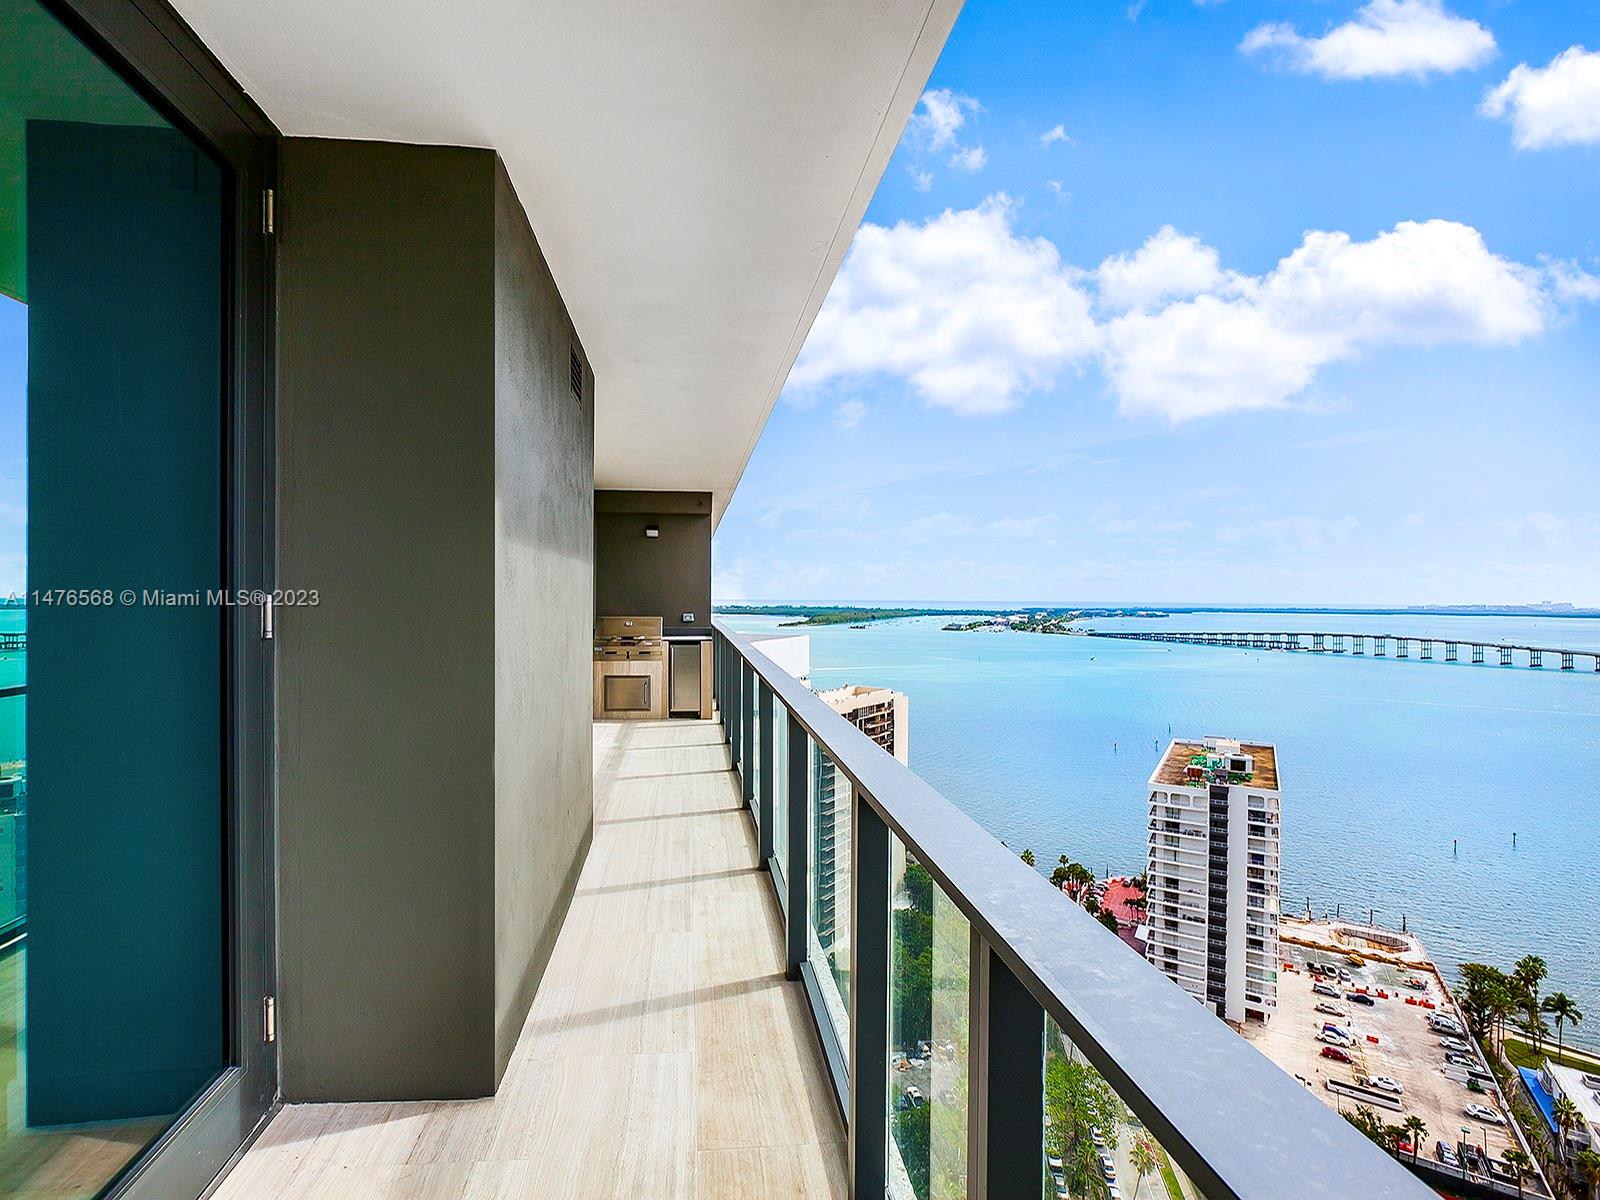 INVESTMENT OPPORTUNITY UNIT RENTED FOR $6,000 UNTIL 07/31/24. Spectacular 1Bed/1.5Baths corner residence at Echo Brickell, a boutique residential high-rise on the East side of Brickell Avenue. Breathtaking bay and city views, Expansive terrace with bbq and mini-fridge. Marble flooring, Italian glass cabinetry, marble countertops and SubZero, Wolf and Bosch appliances. Savant System, infinity-edge pool, state-of-the-art gym and spa deck with panoramic views of Biscayne Bay and Downtown Miami. 24/7 concierge, valet, Toscanino bar and restaurant at pool level by Toscana Divino.